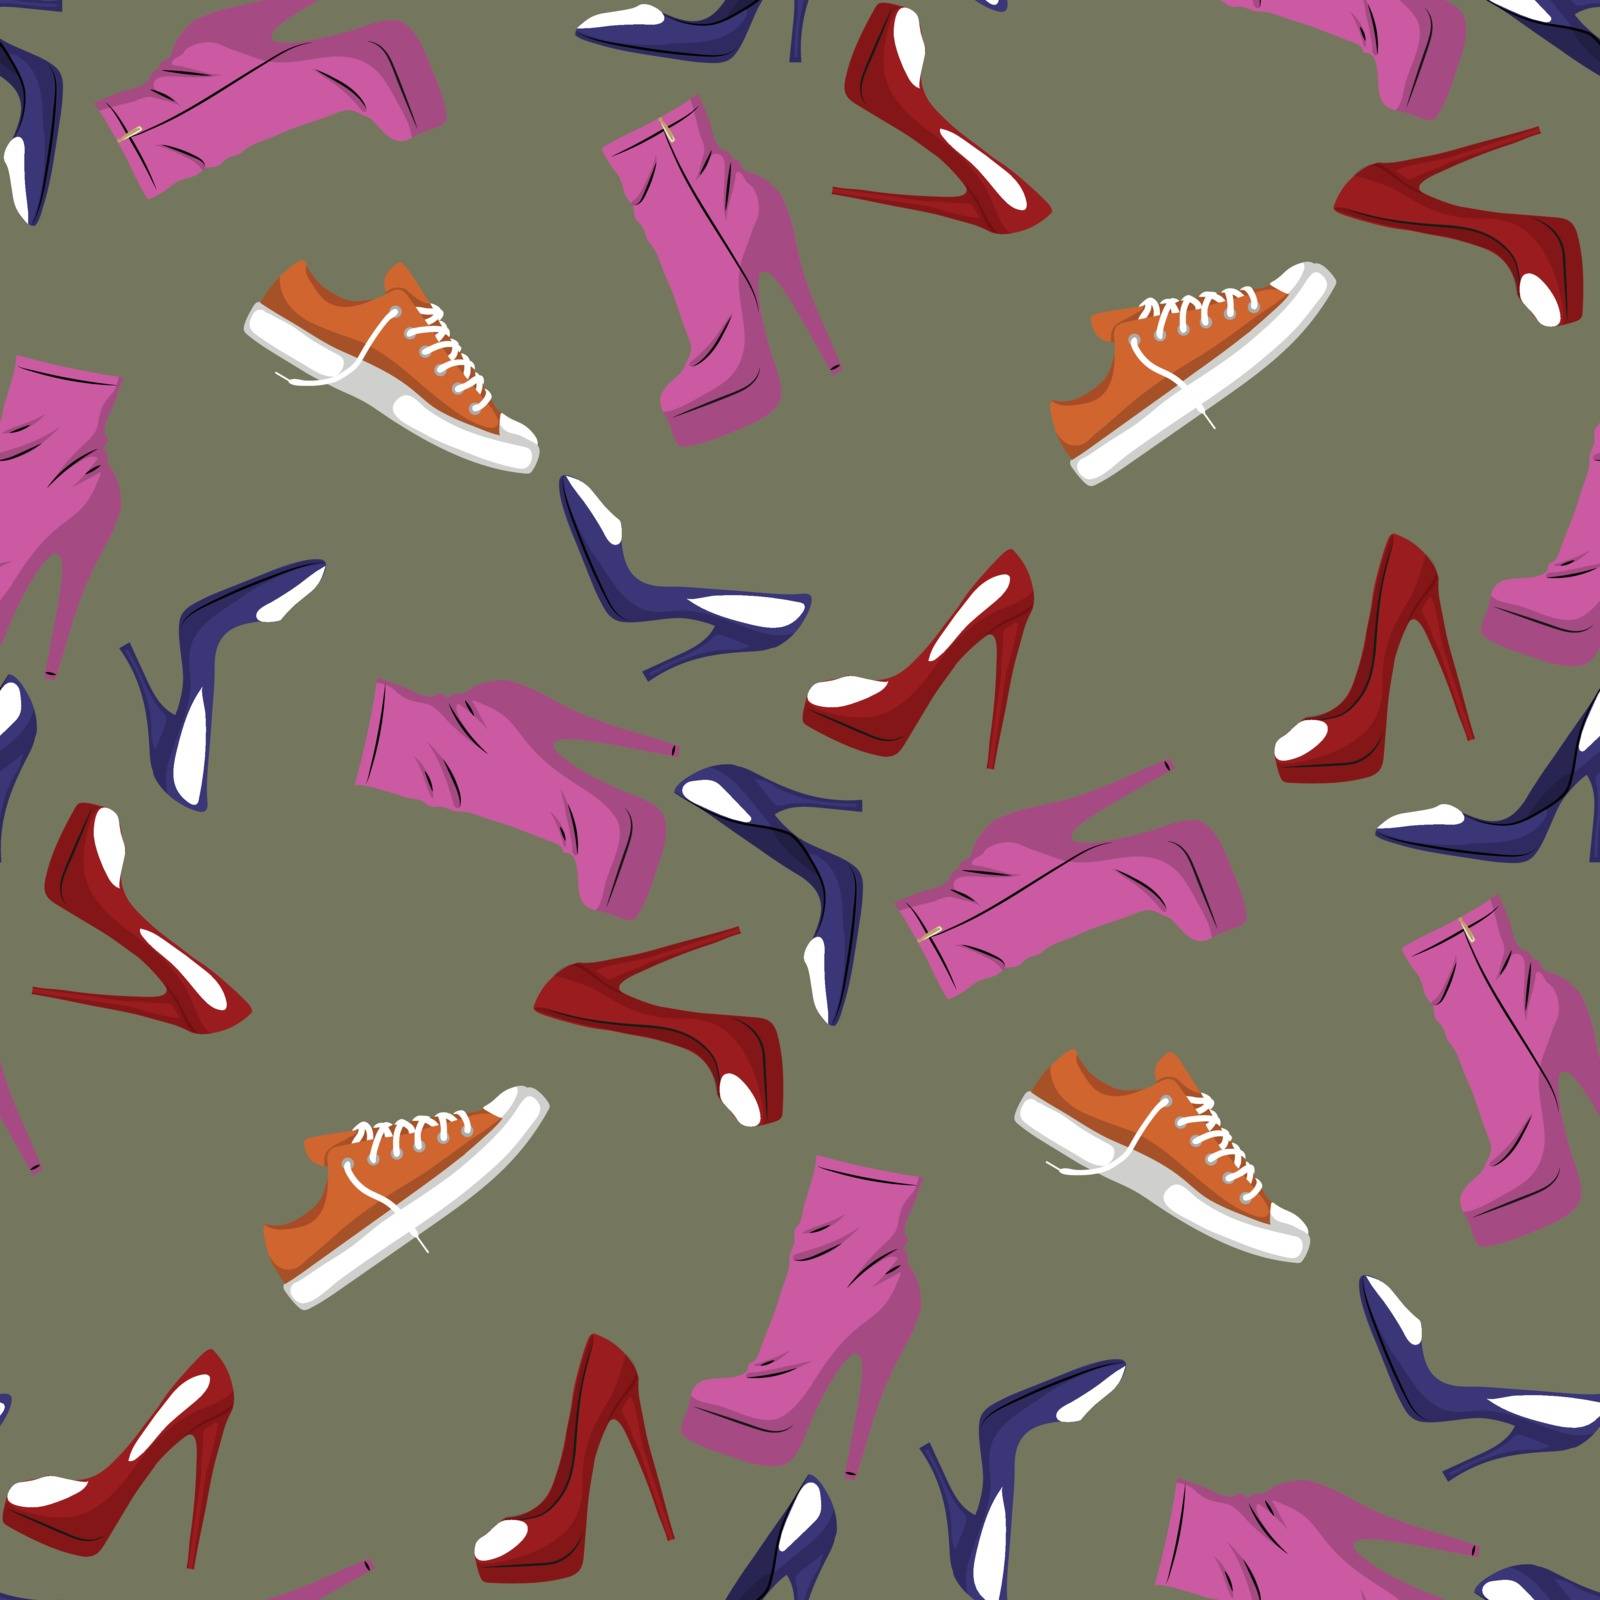 Seamless pattern of Shoes - running shoes sneakers, boots, high-heeled shoe. Design element. Fashion Vector Illustration. by nutela_pancake